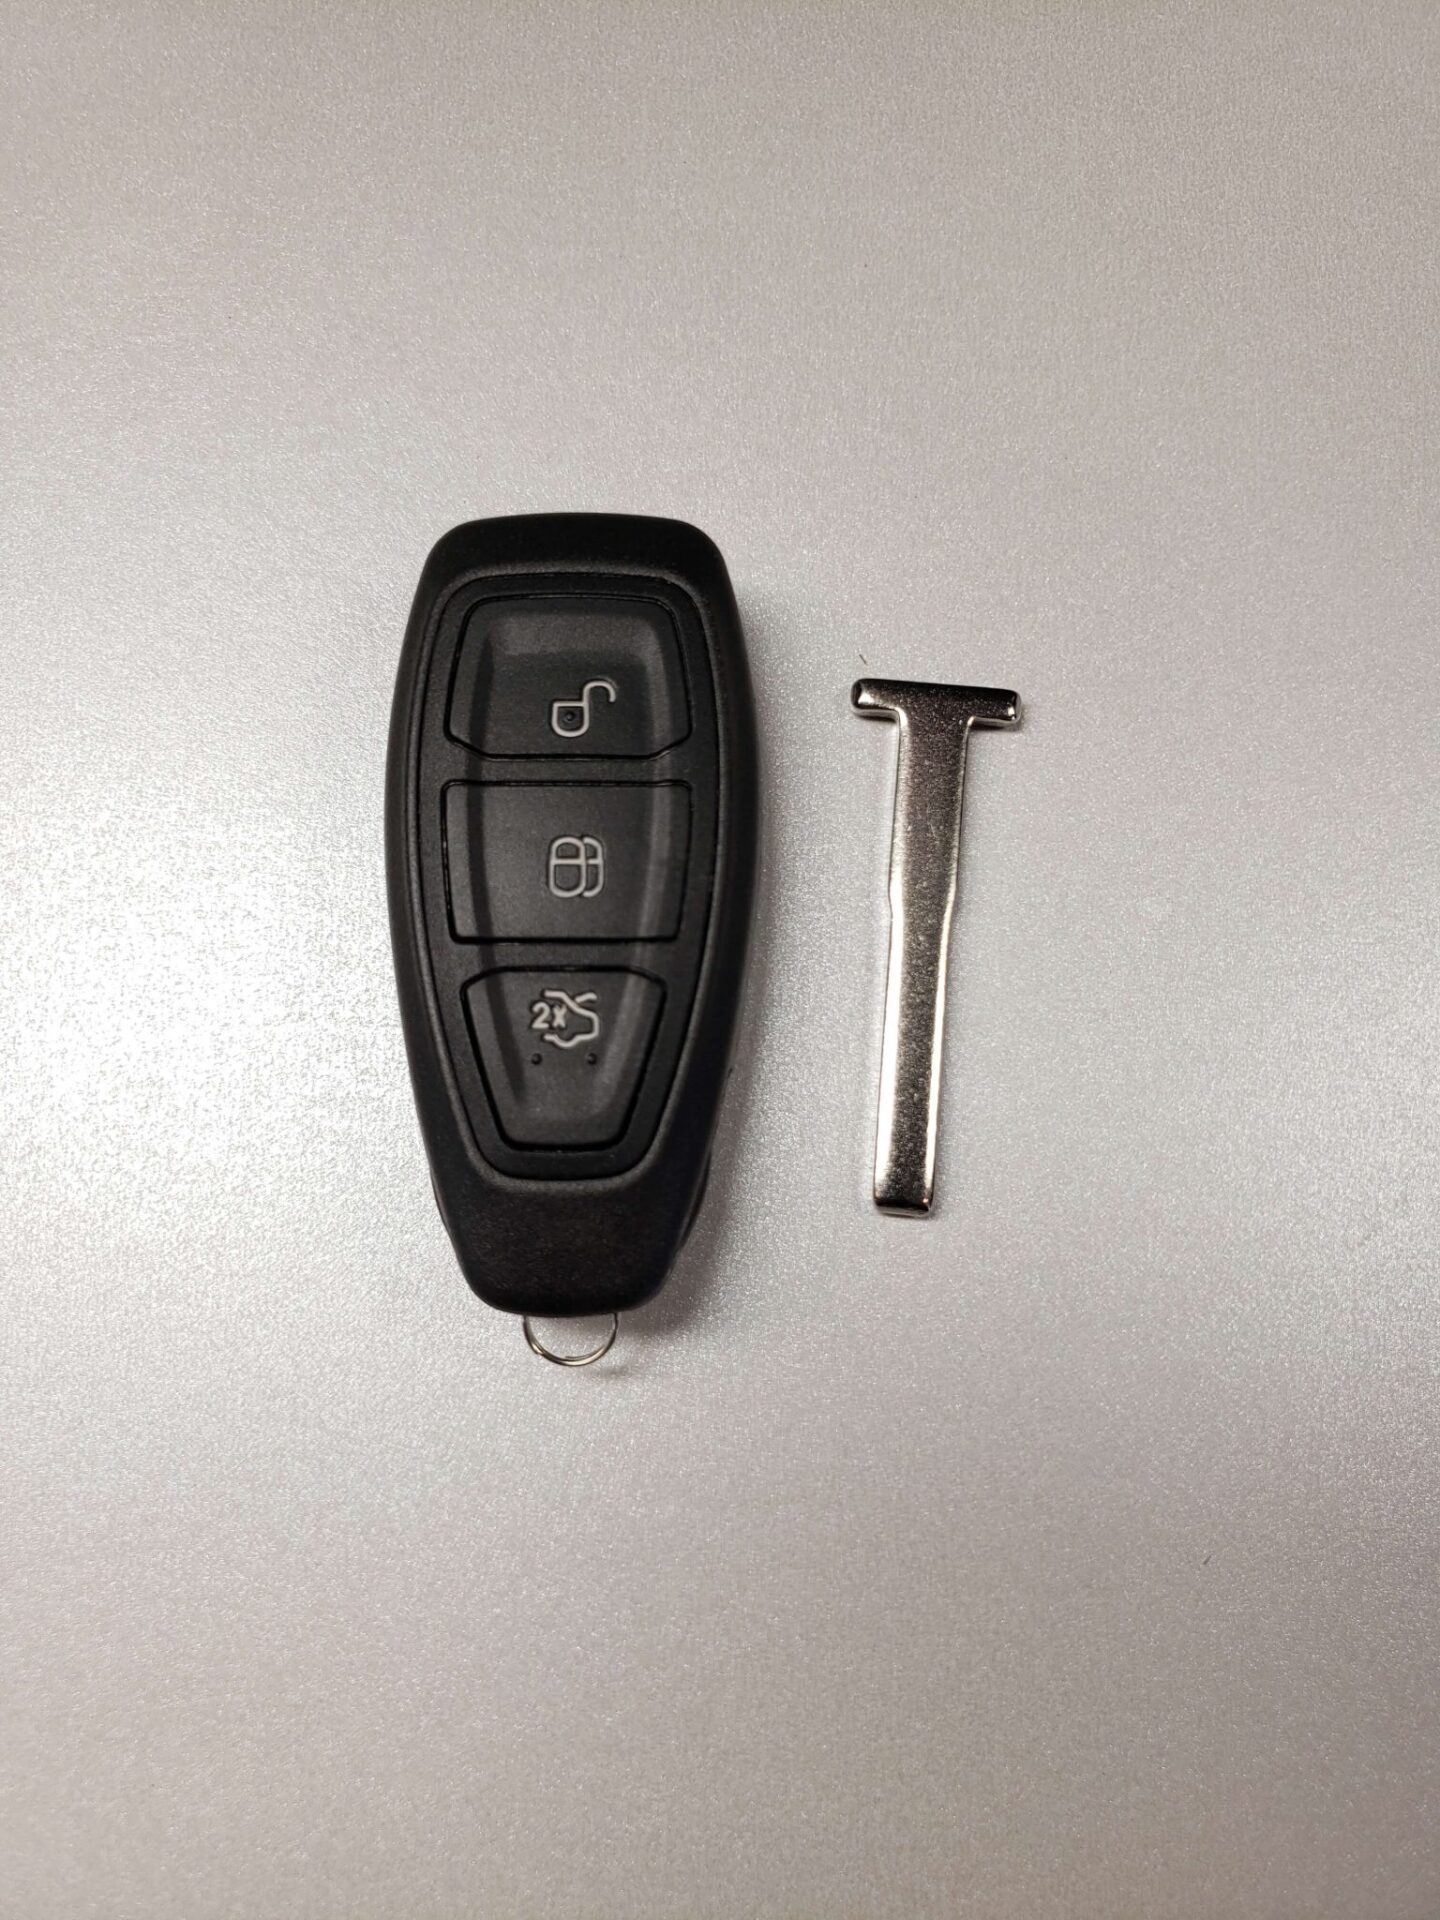 Ford Fiesta Replacement Keys What To Do, Options, Cost